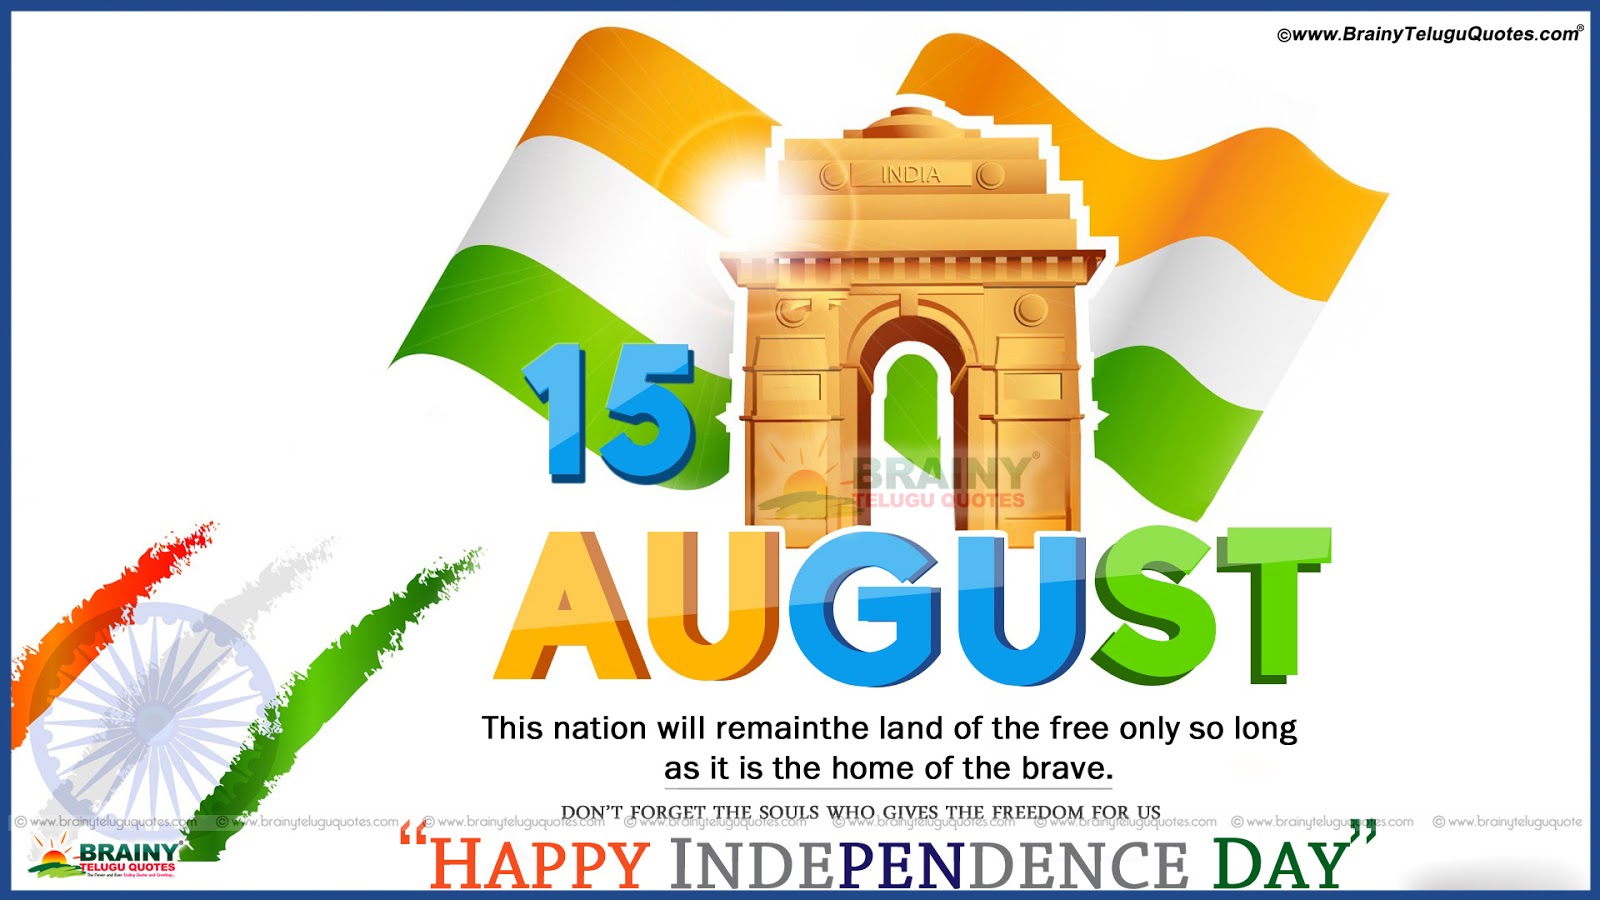 Here Is Independence Day Quotes, Independence Day Greetings, - Independent Day Wish Quotes - HD Wallpaper 